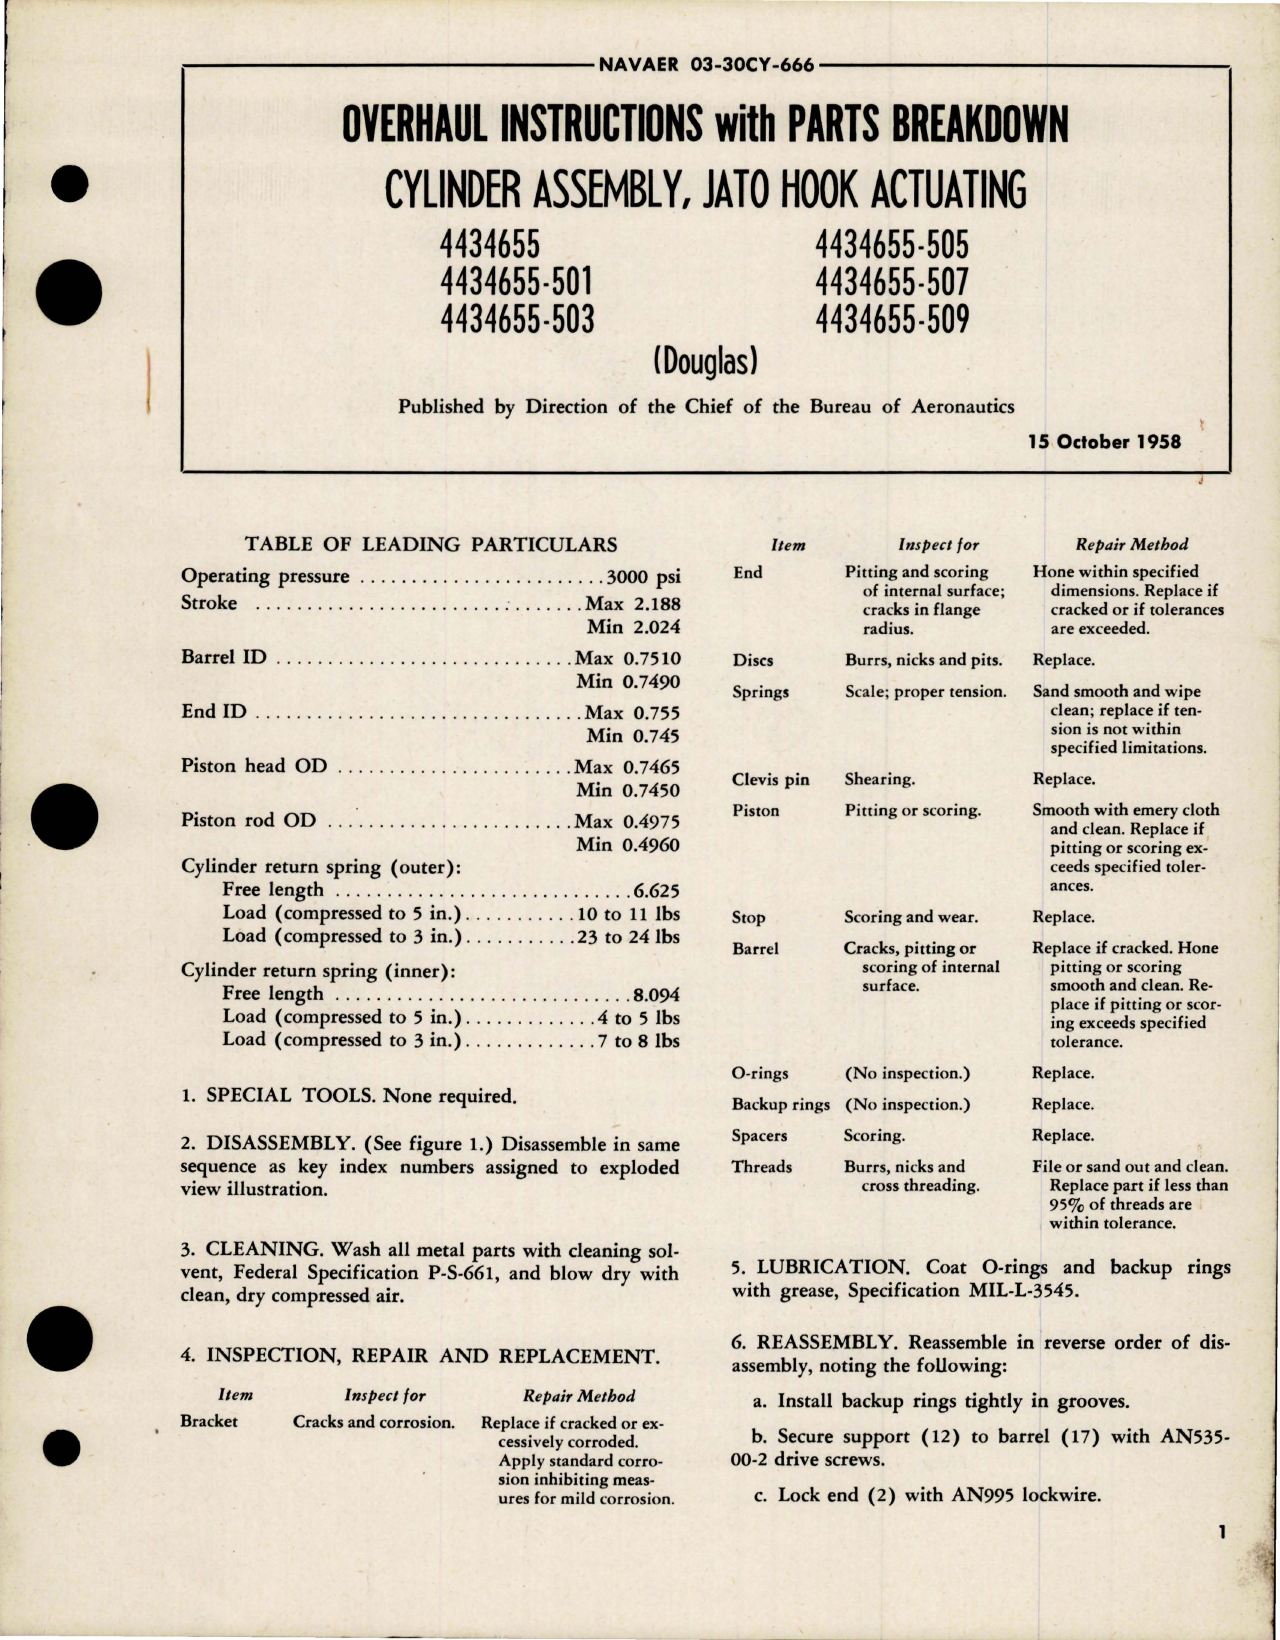 Sample page 1 from AirCorps Library document: Overhaul Instructions with Parts for Jato Hook Actuating Cylinder Assembly